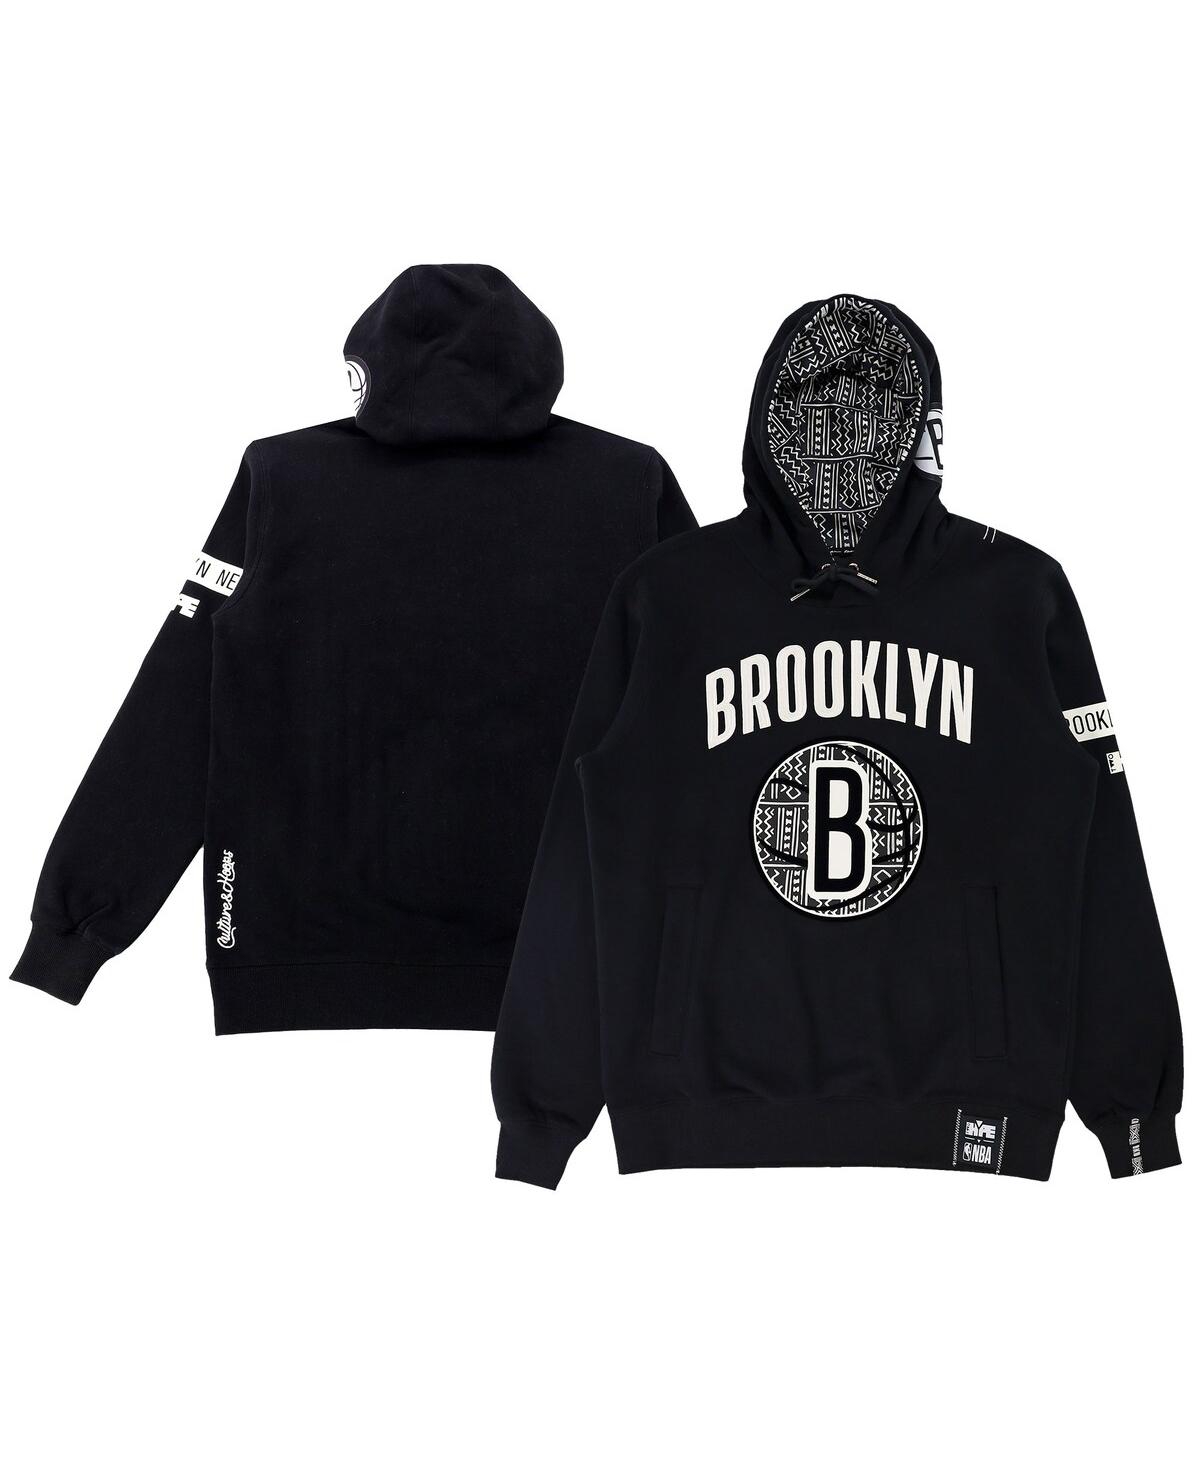 Men's and Women's Nba x Two Hype Black Brooklyn Nets Culture & Hoops Heavyweight Pullover Hoodie - Black